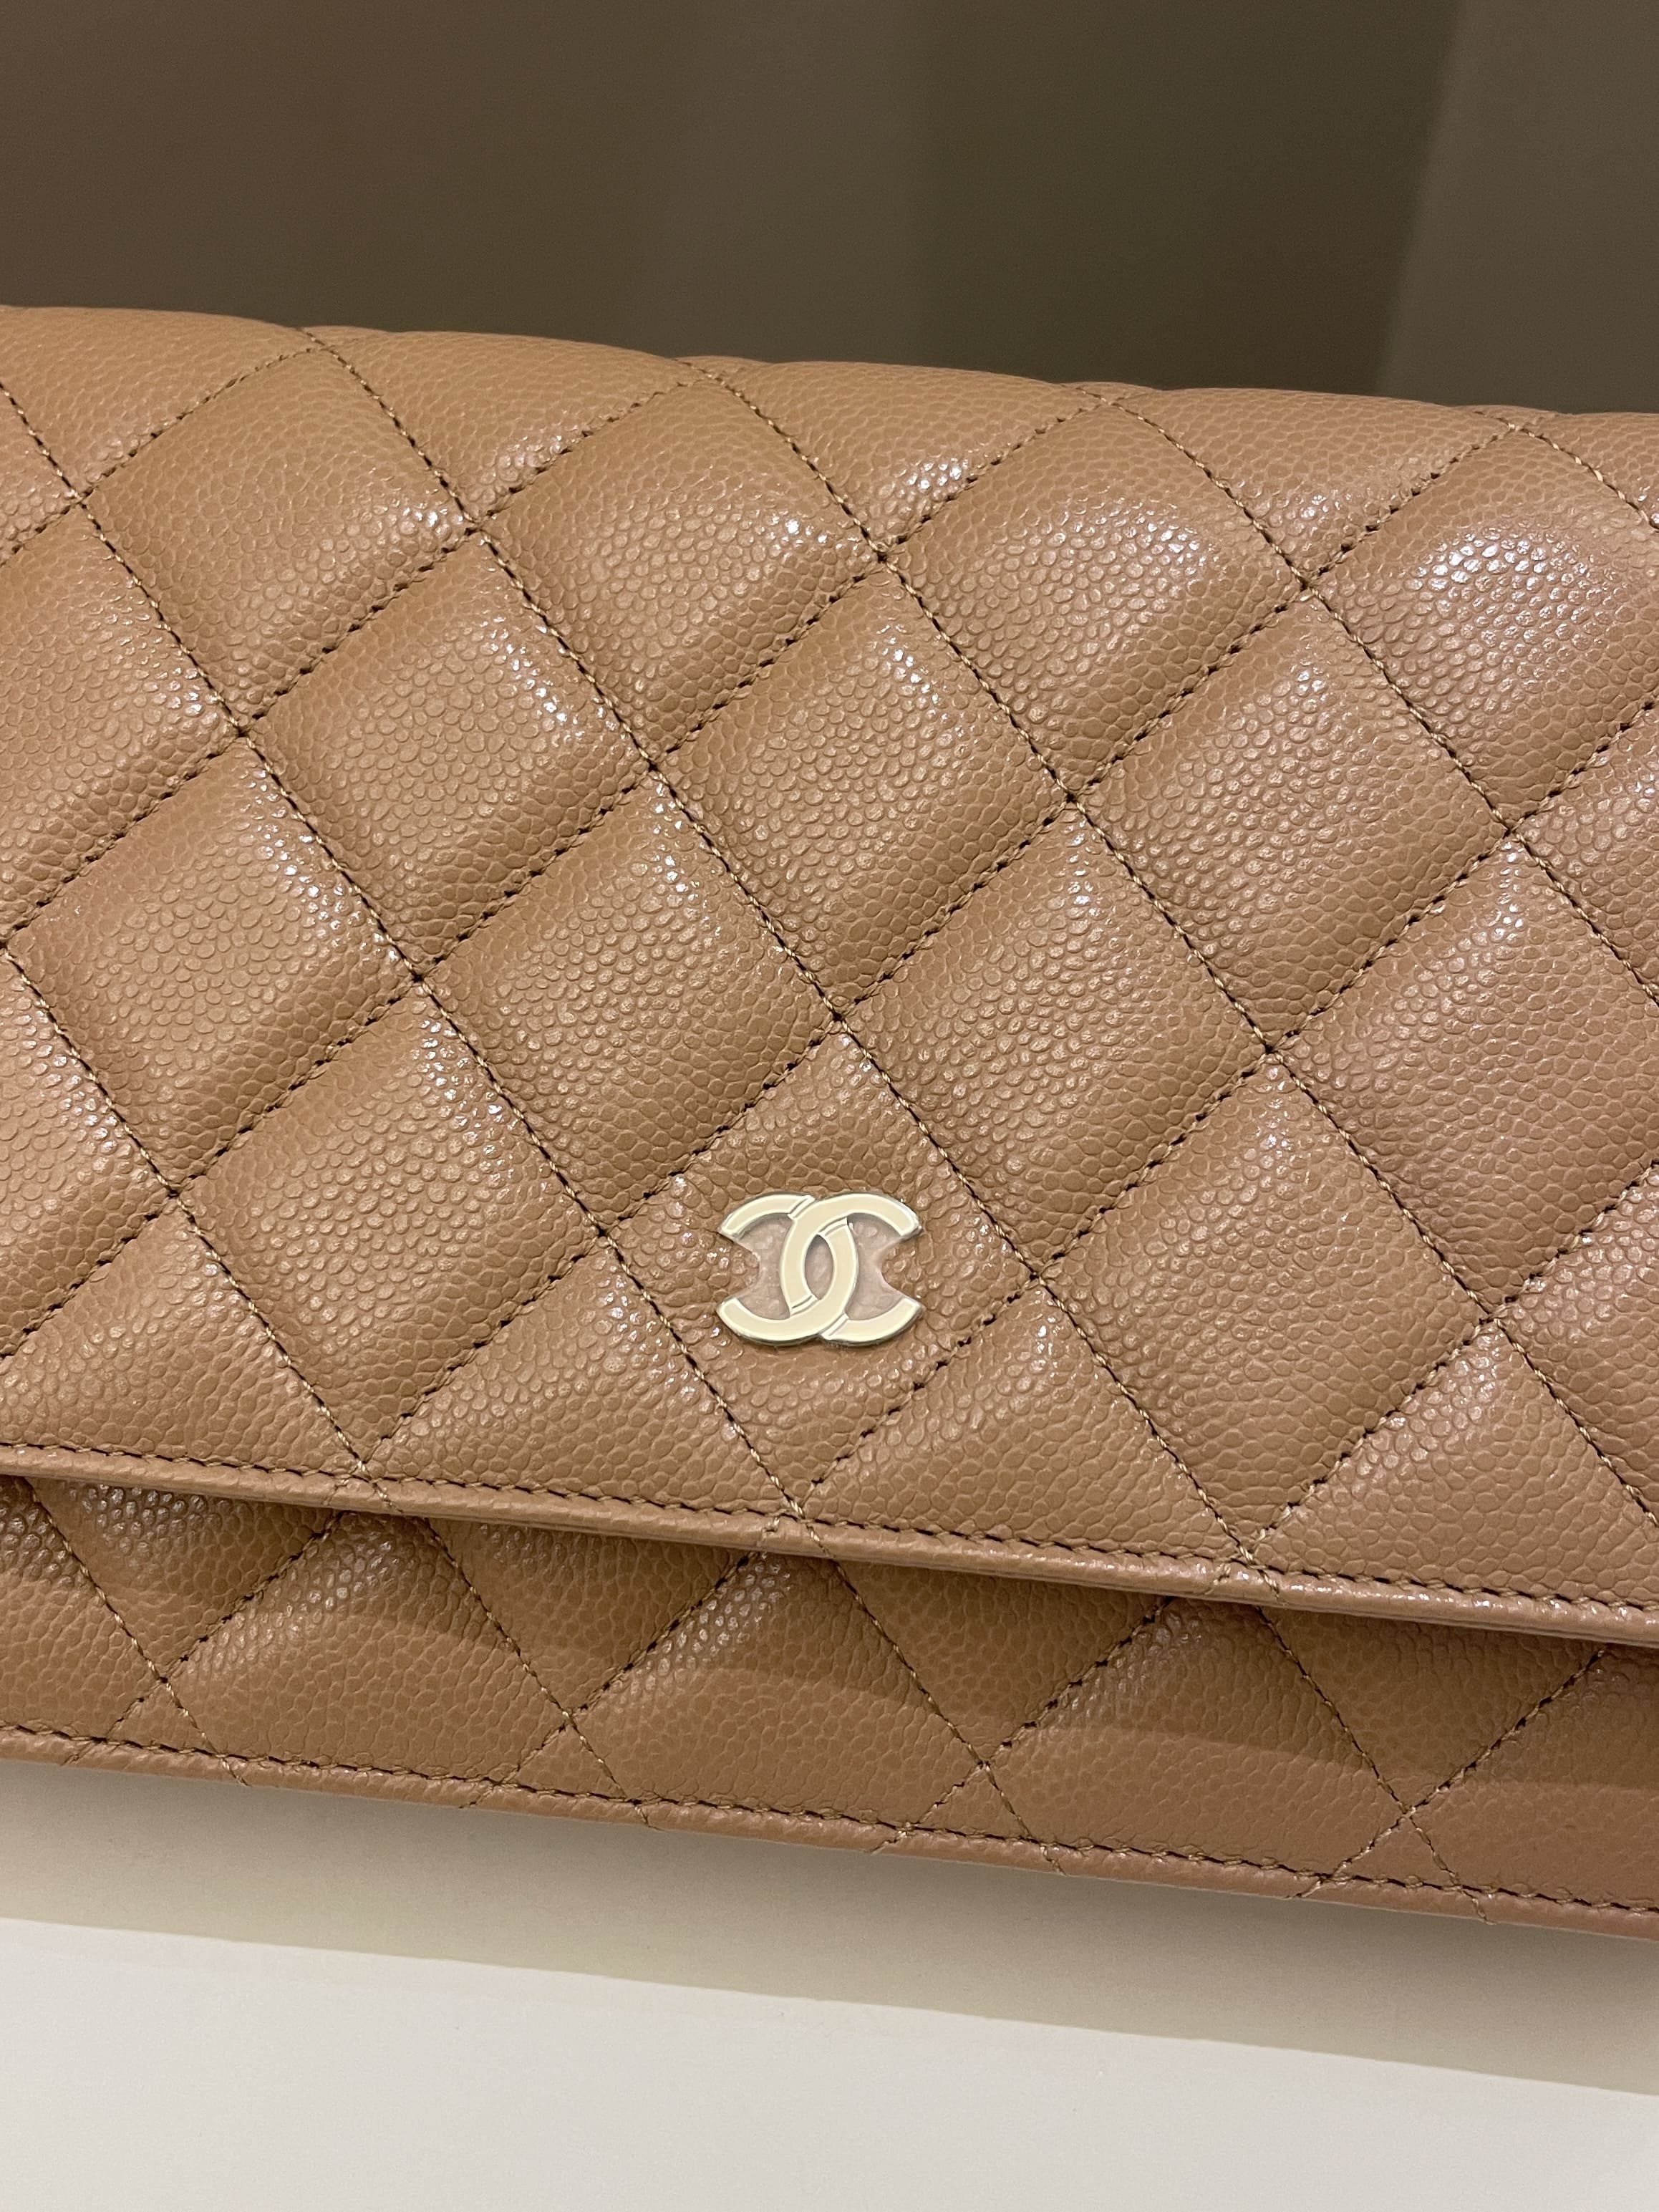 Chanel Classic Quilted Wallet on Chain Dark Nude Beige Caviar